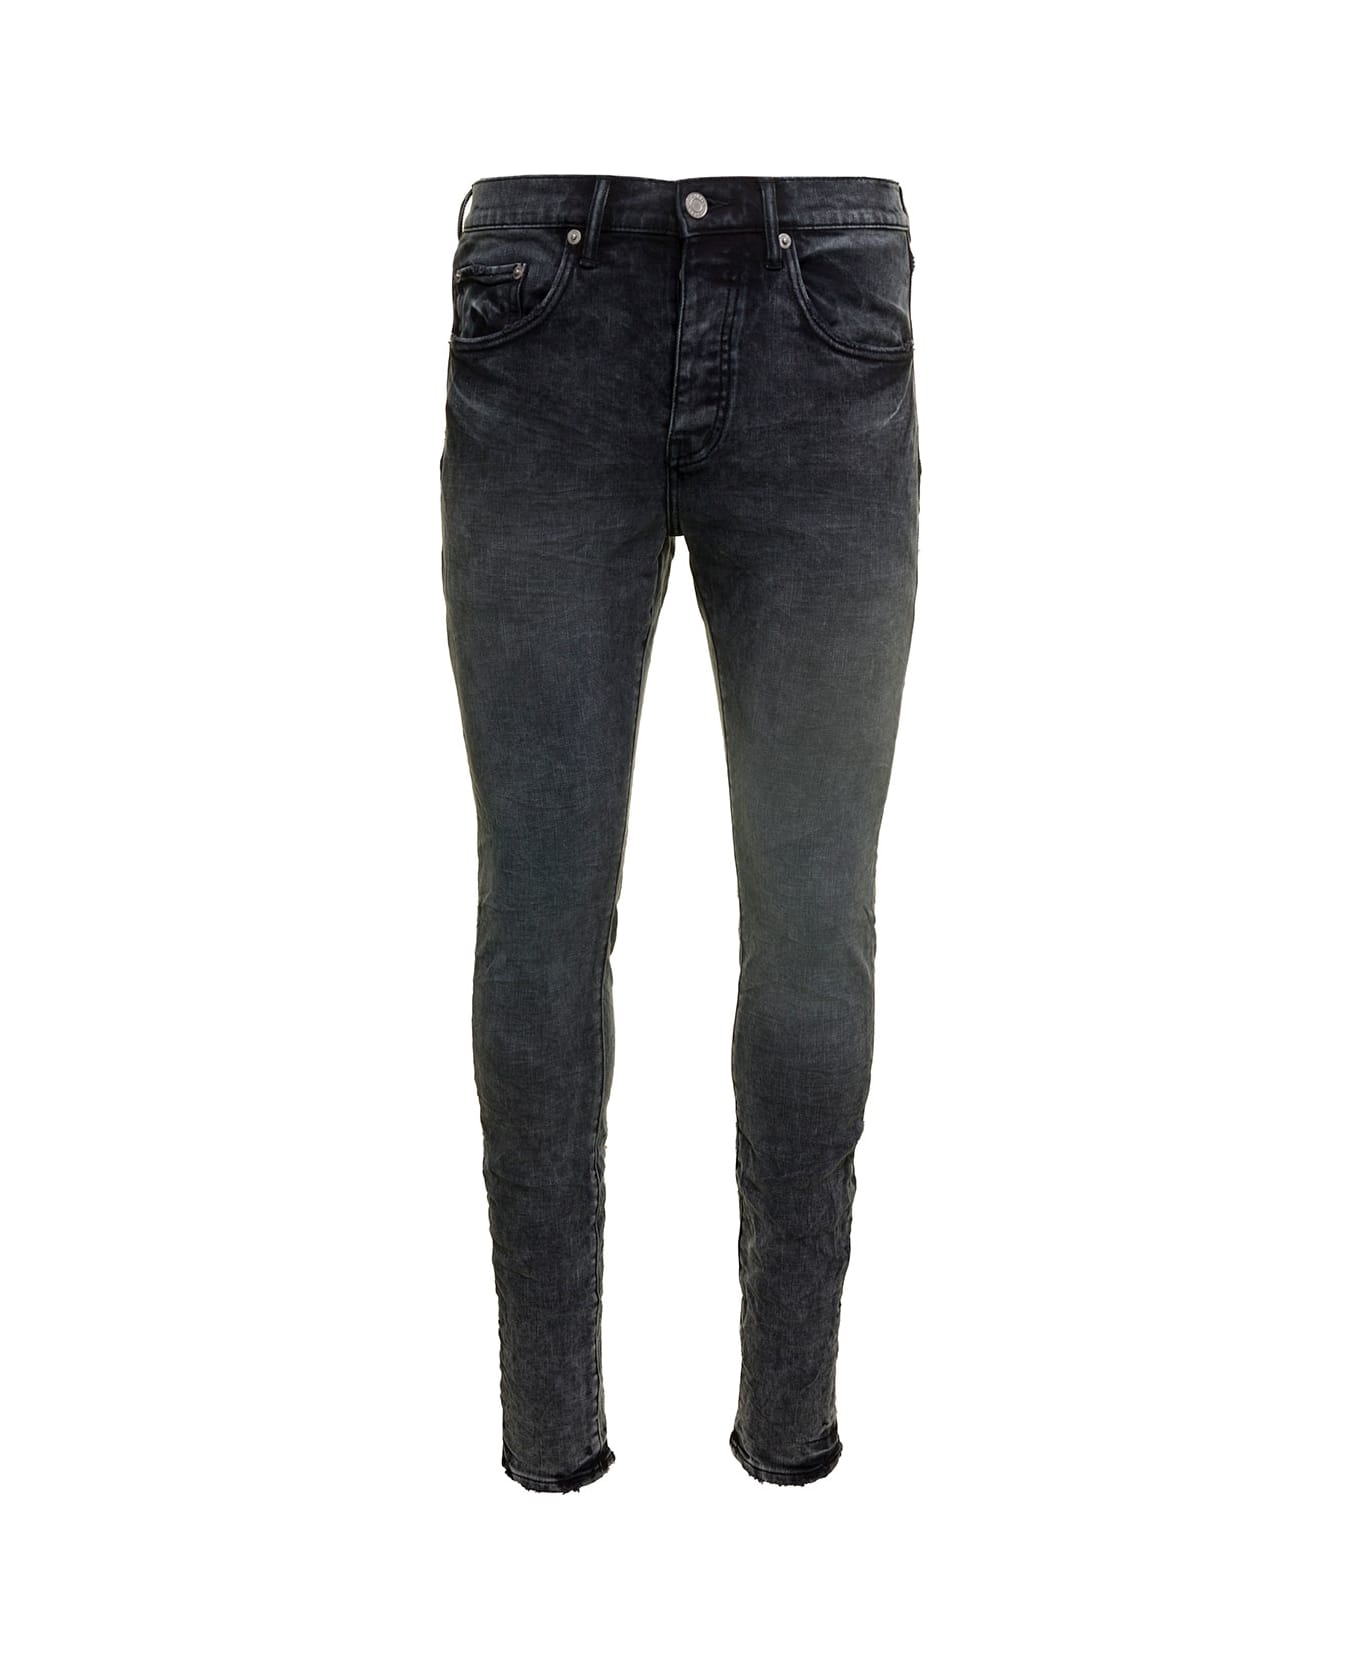 Purple Brand Black Skinny Jeans With Tonal Logo Patch And Crinkled Effect In Stretch Cotton Denim Man - Black